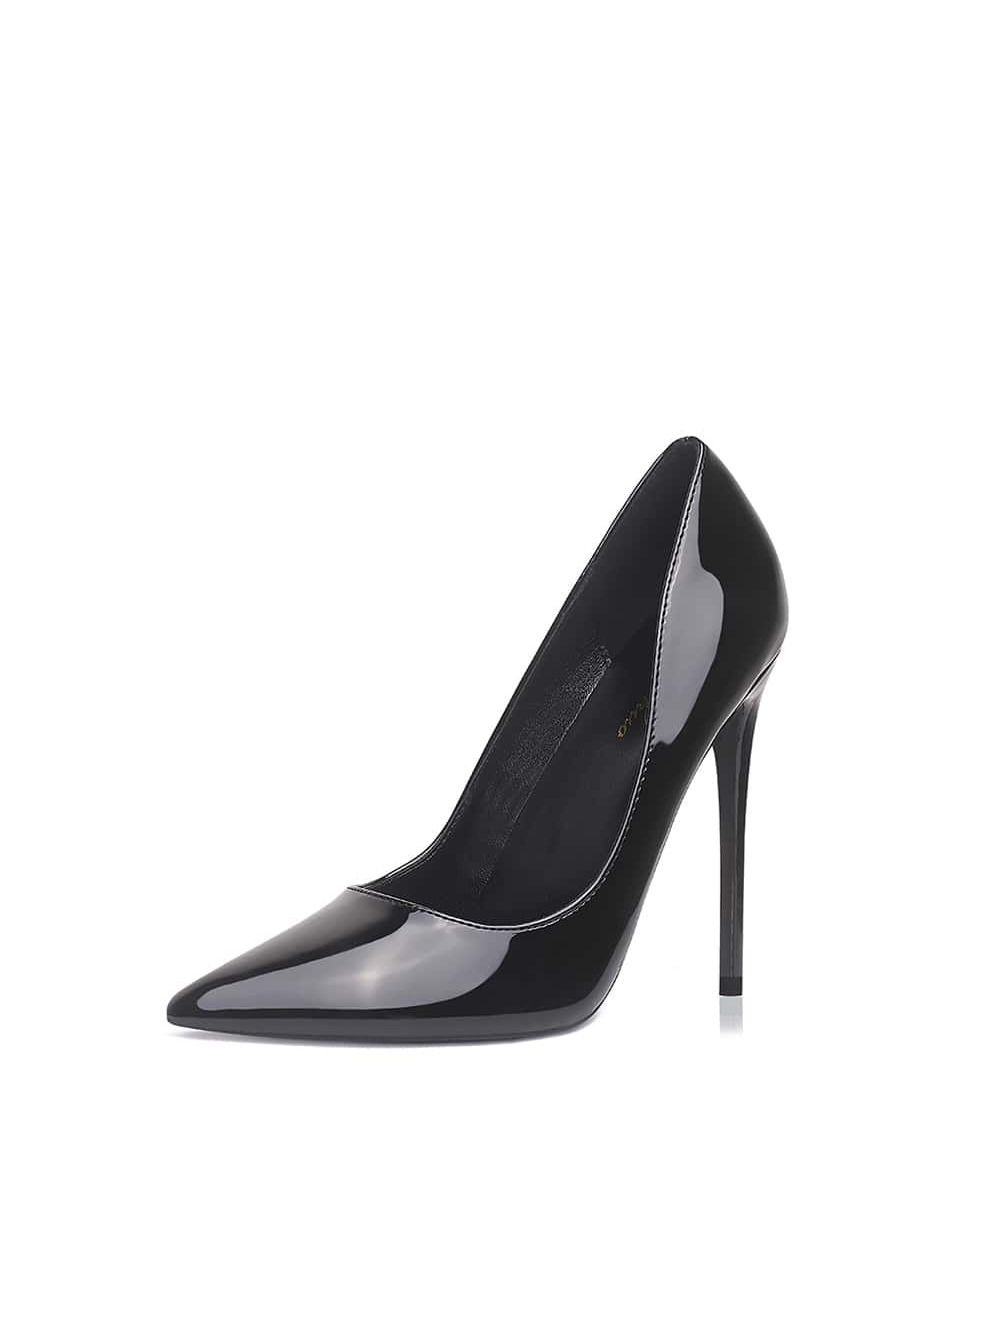 Classic Sexy Pointed-toe High Heels With 12cm Stiletto Heels For Office Ladies | SHEIN